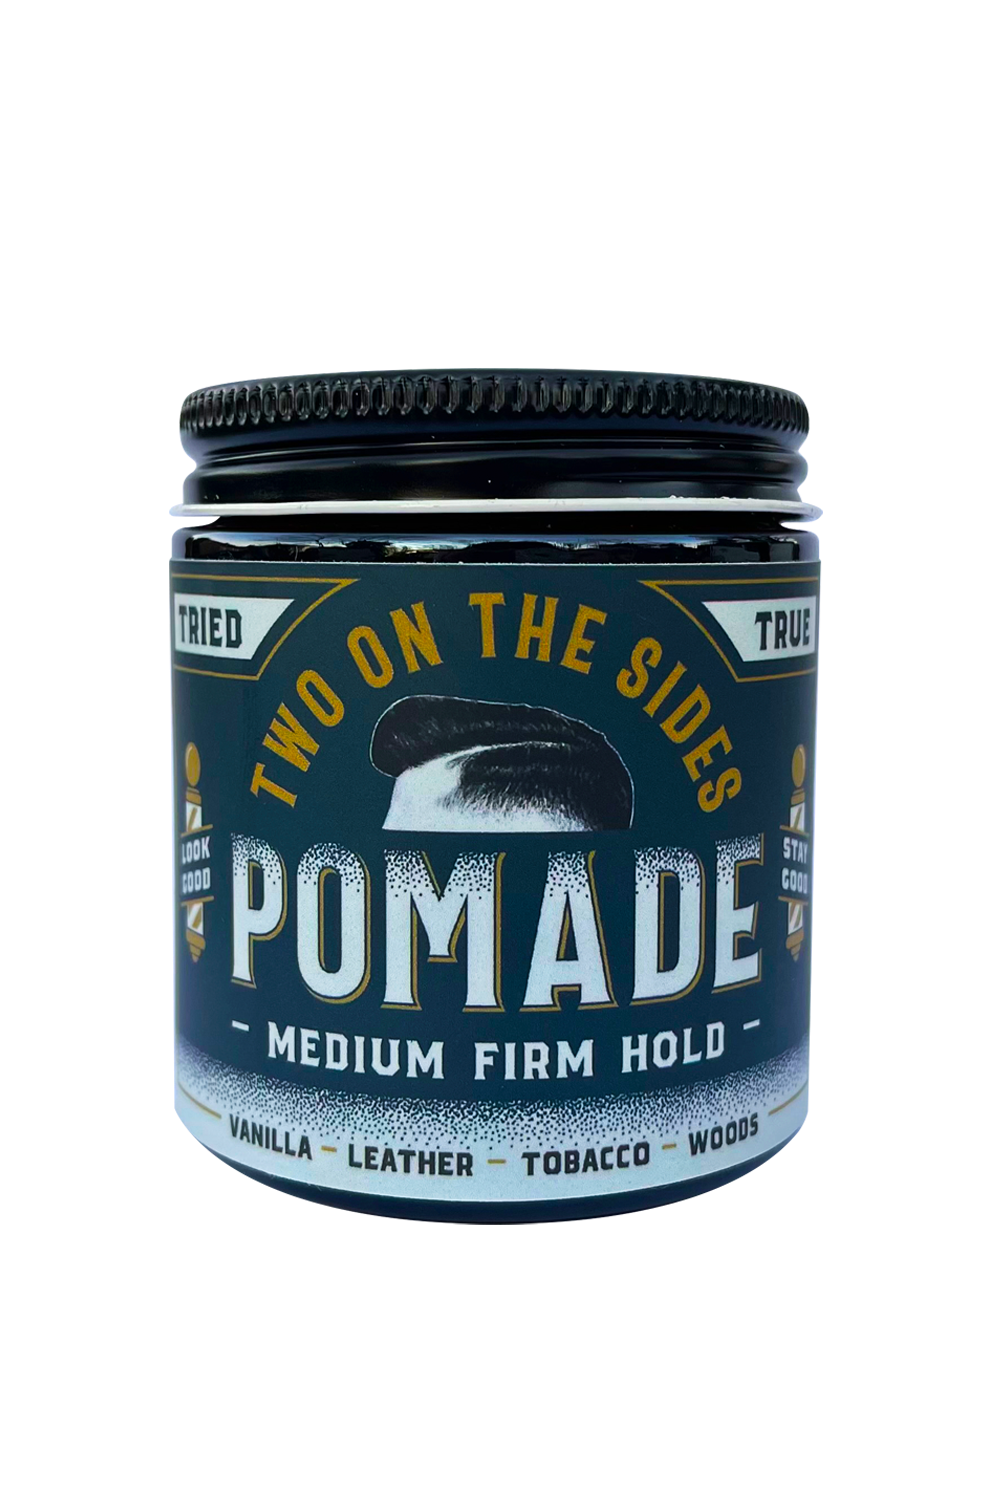 Two On The Sides Medium Firm Pomade